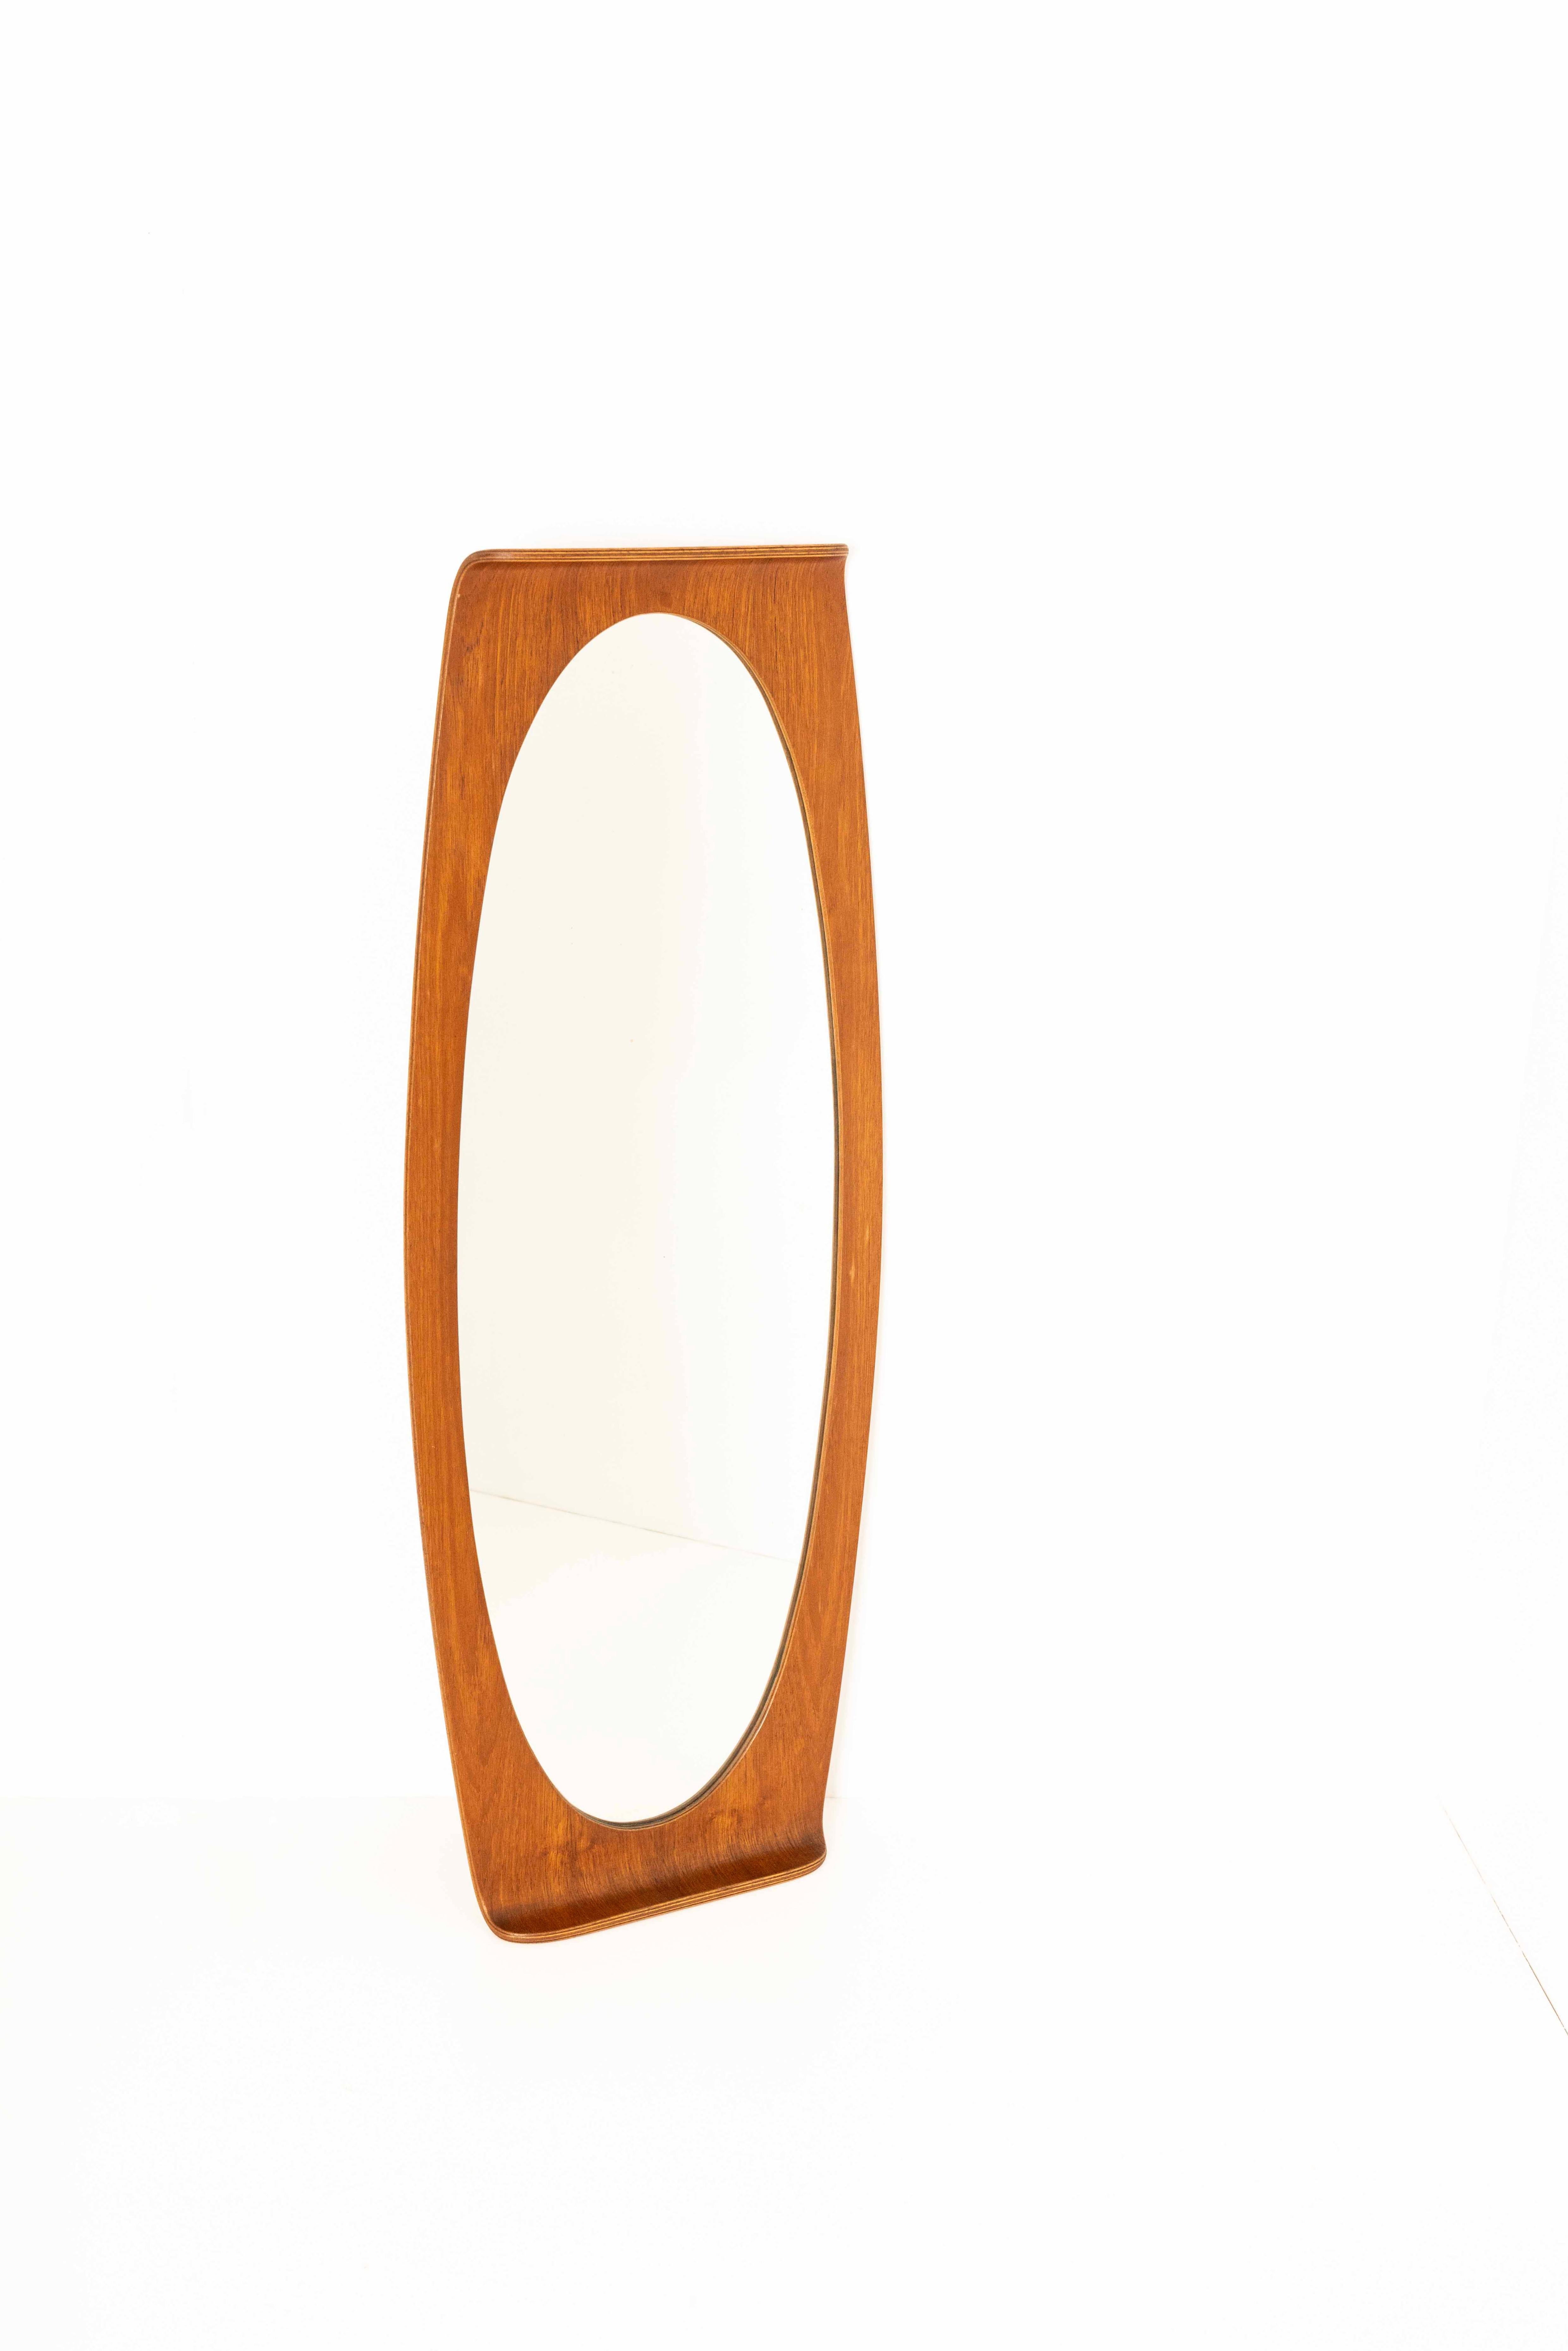 Mid-Century Modern Italian Oval Plywood Mirror by Campo & Graffi for Home, 1960